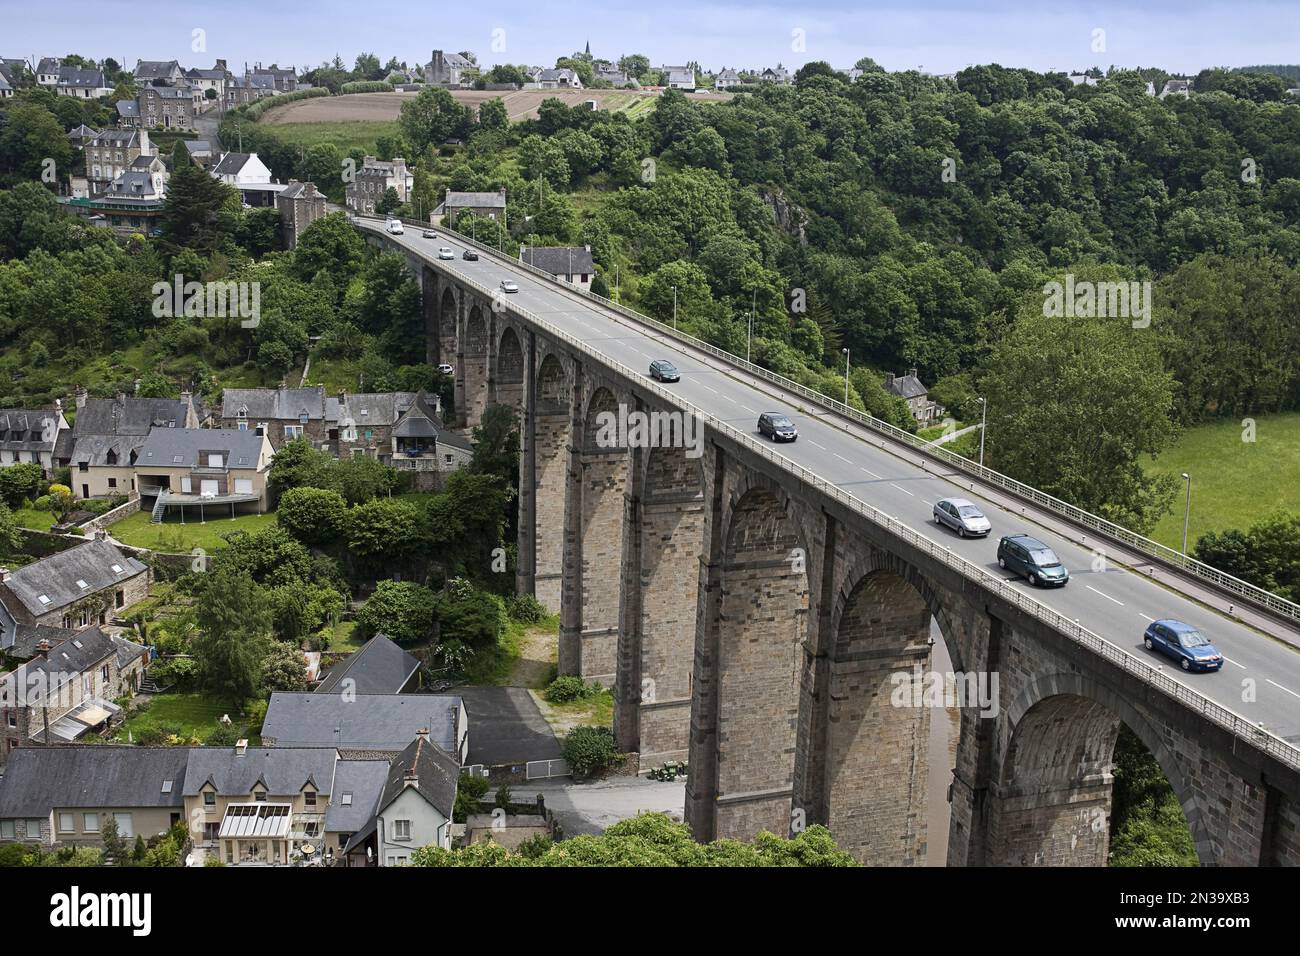 Viaduct and Old Port on River Rance, Dinan, Brittany, France Stock Photo